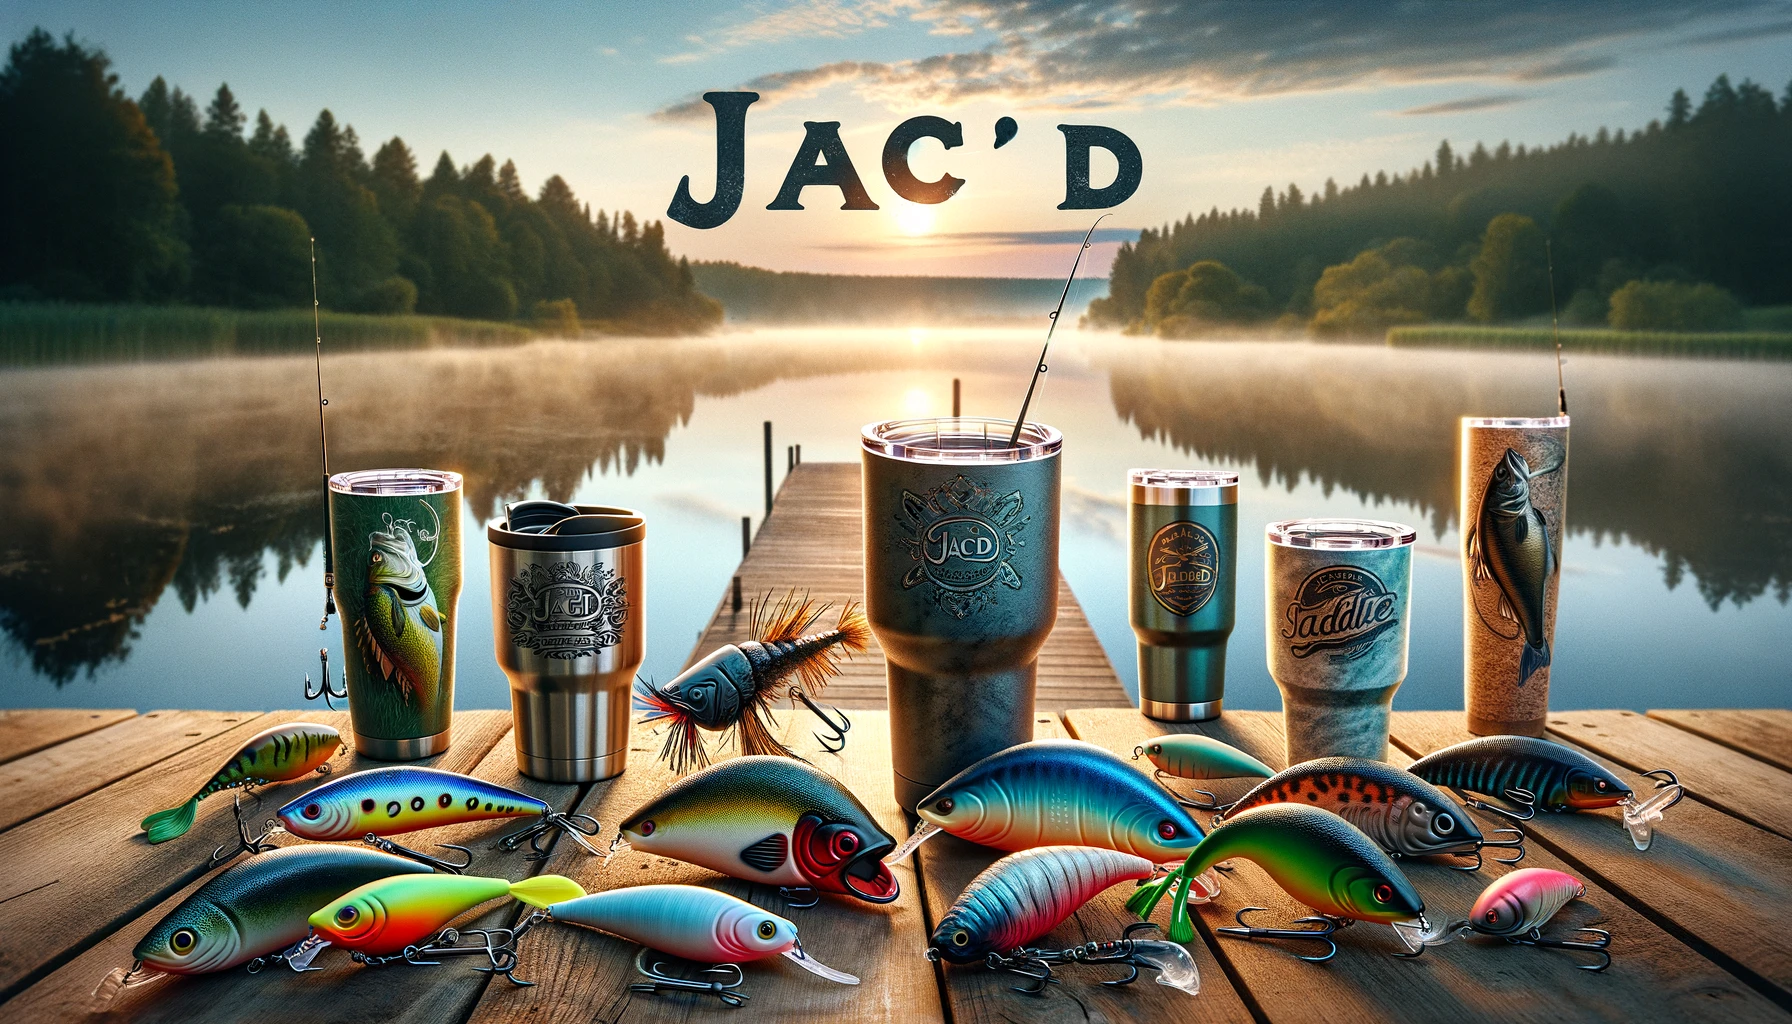 Tranquil lake dawn scene with JAC'D logo, fishing lures on a wooden dock, and custom-designed tumblers reflecting the morning sun, symbolizing a fusion of fishing and outdoor leisure.